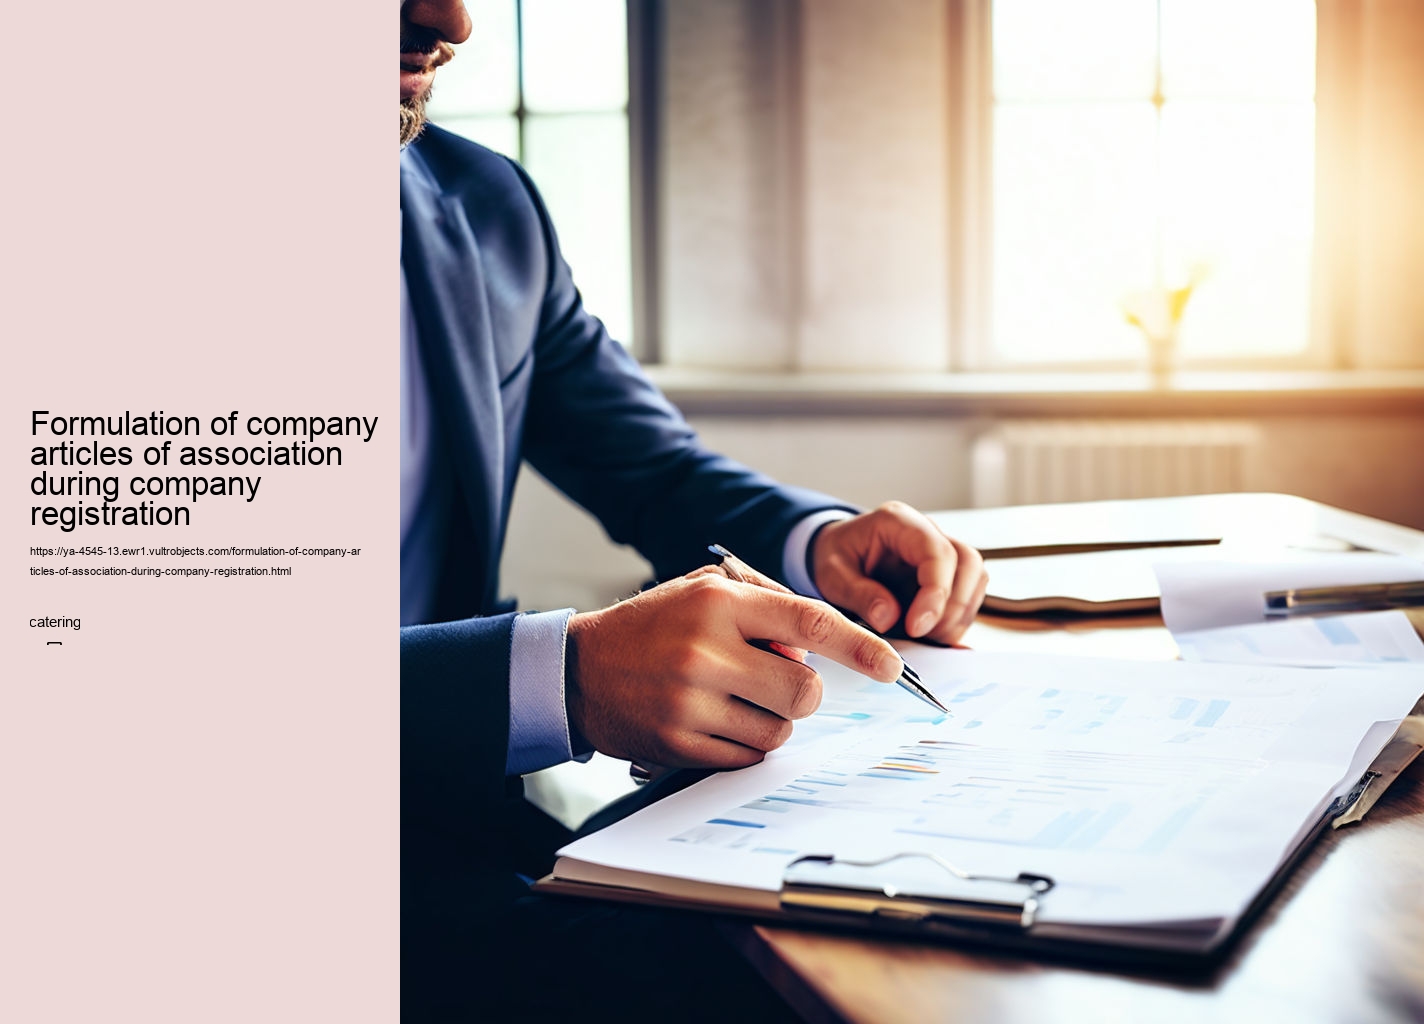 Formulation of company articles of association during company registration